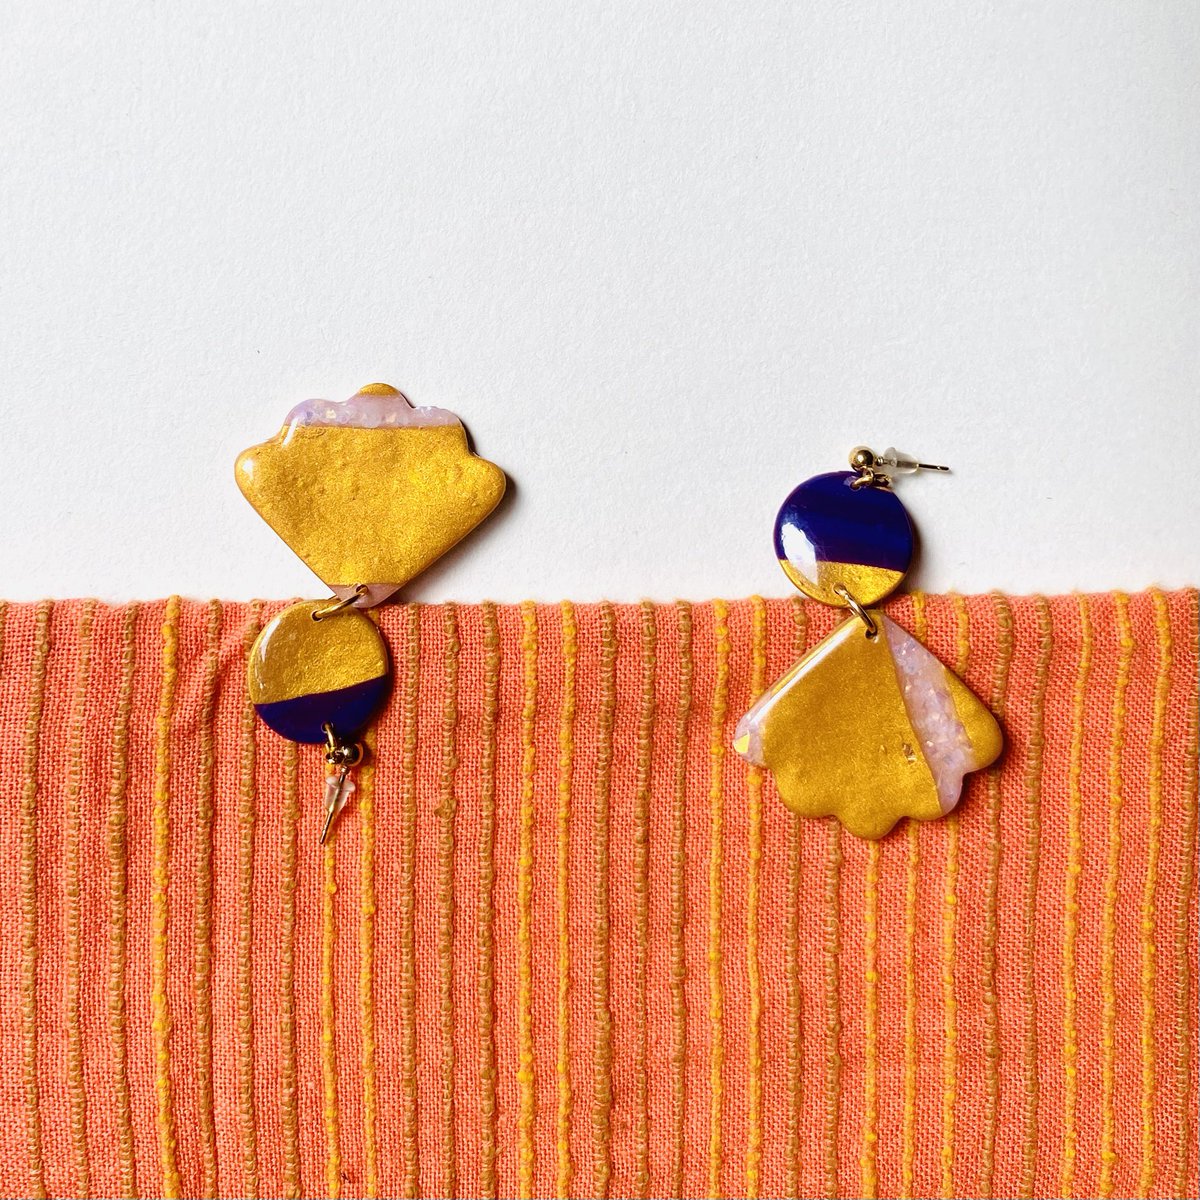 This pair emits a warm radiant glow that captivates the senses. 
Your perfect pair for a lovely Sunday by pool.

#mimojewelry #uganda #kampala #handmadejewelry #statementearrings